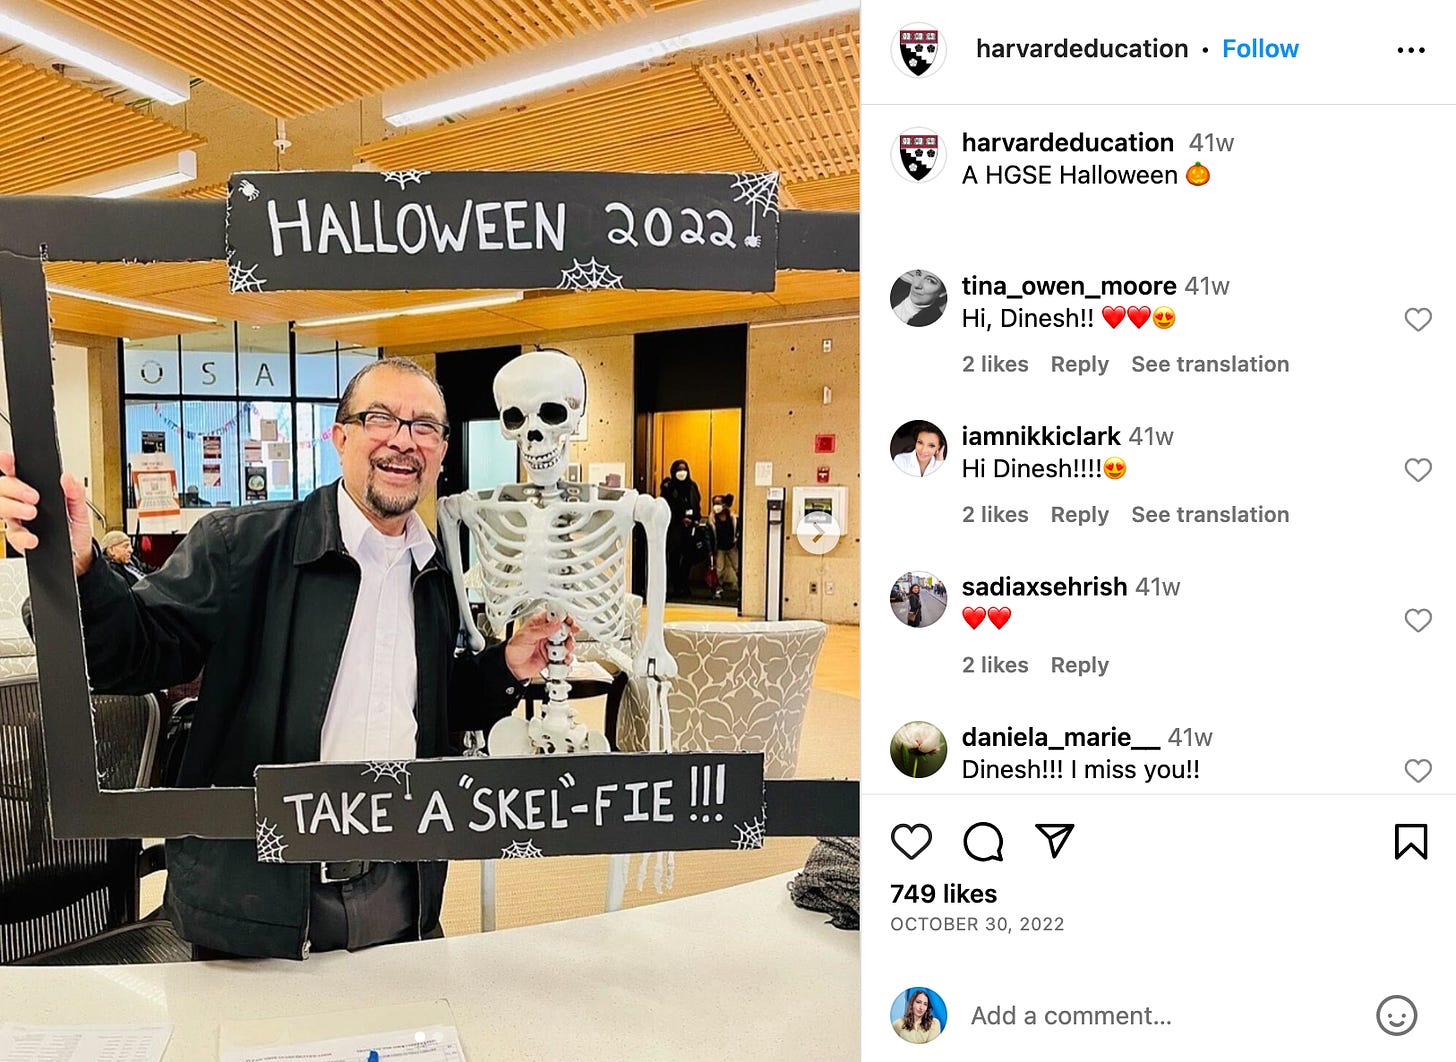 Photo of someone holding a skeleton and sign that says "Halloween 2022 Take a Skel-Fie" Likely someone who works at Harvard!